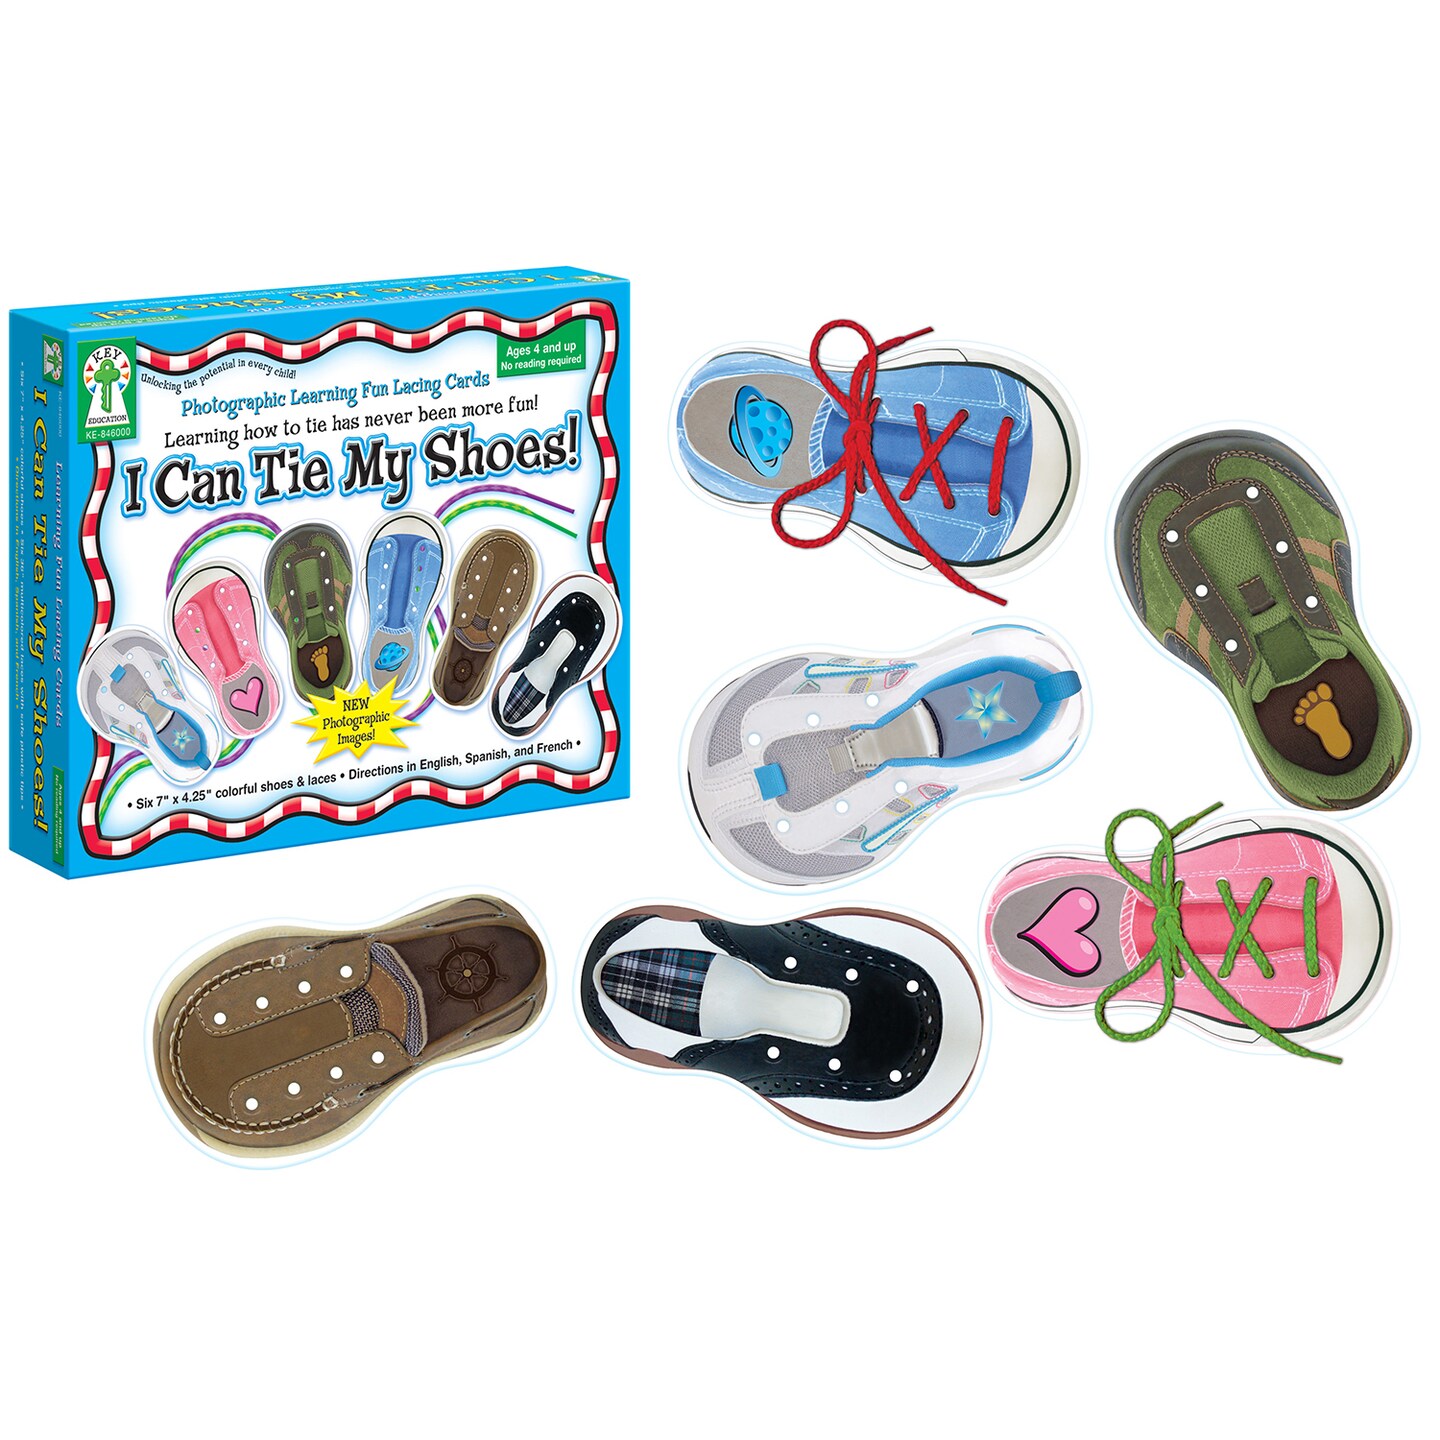 Key Education - I Can Tie My Shoes Lacing Cards